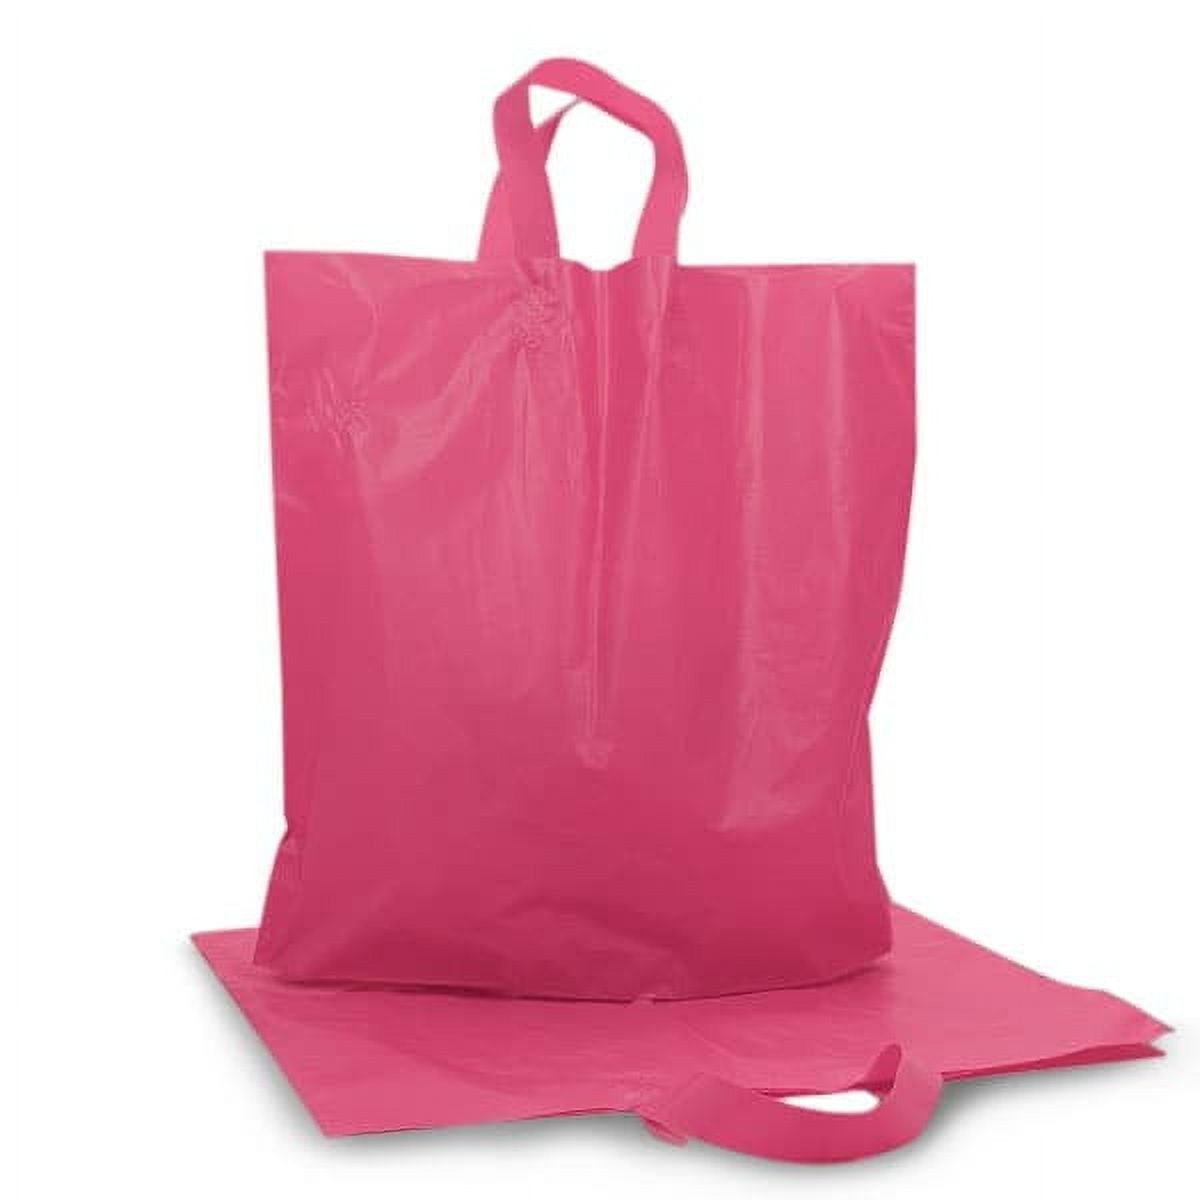 HDPE Bags - HDPE Blockhead Bag Prices, Manufacturers & Suppliers